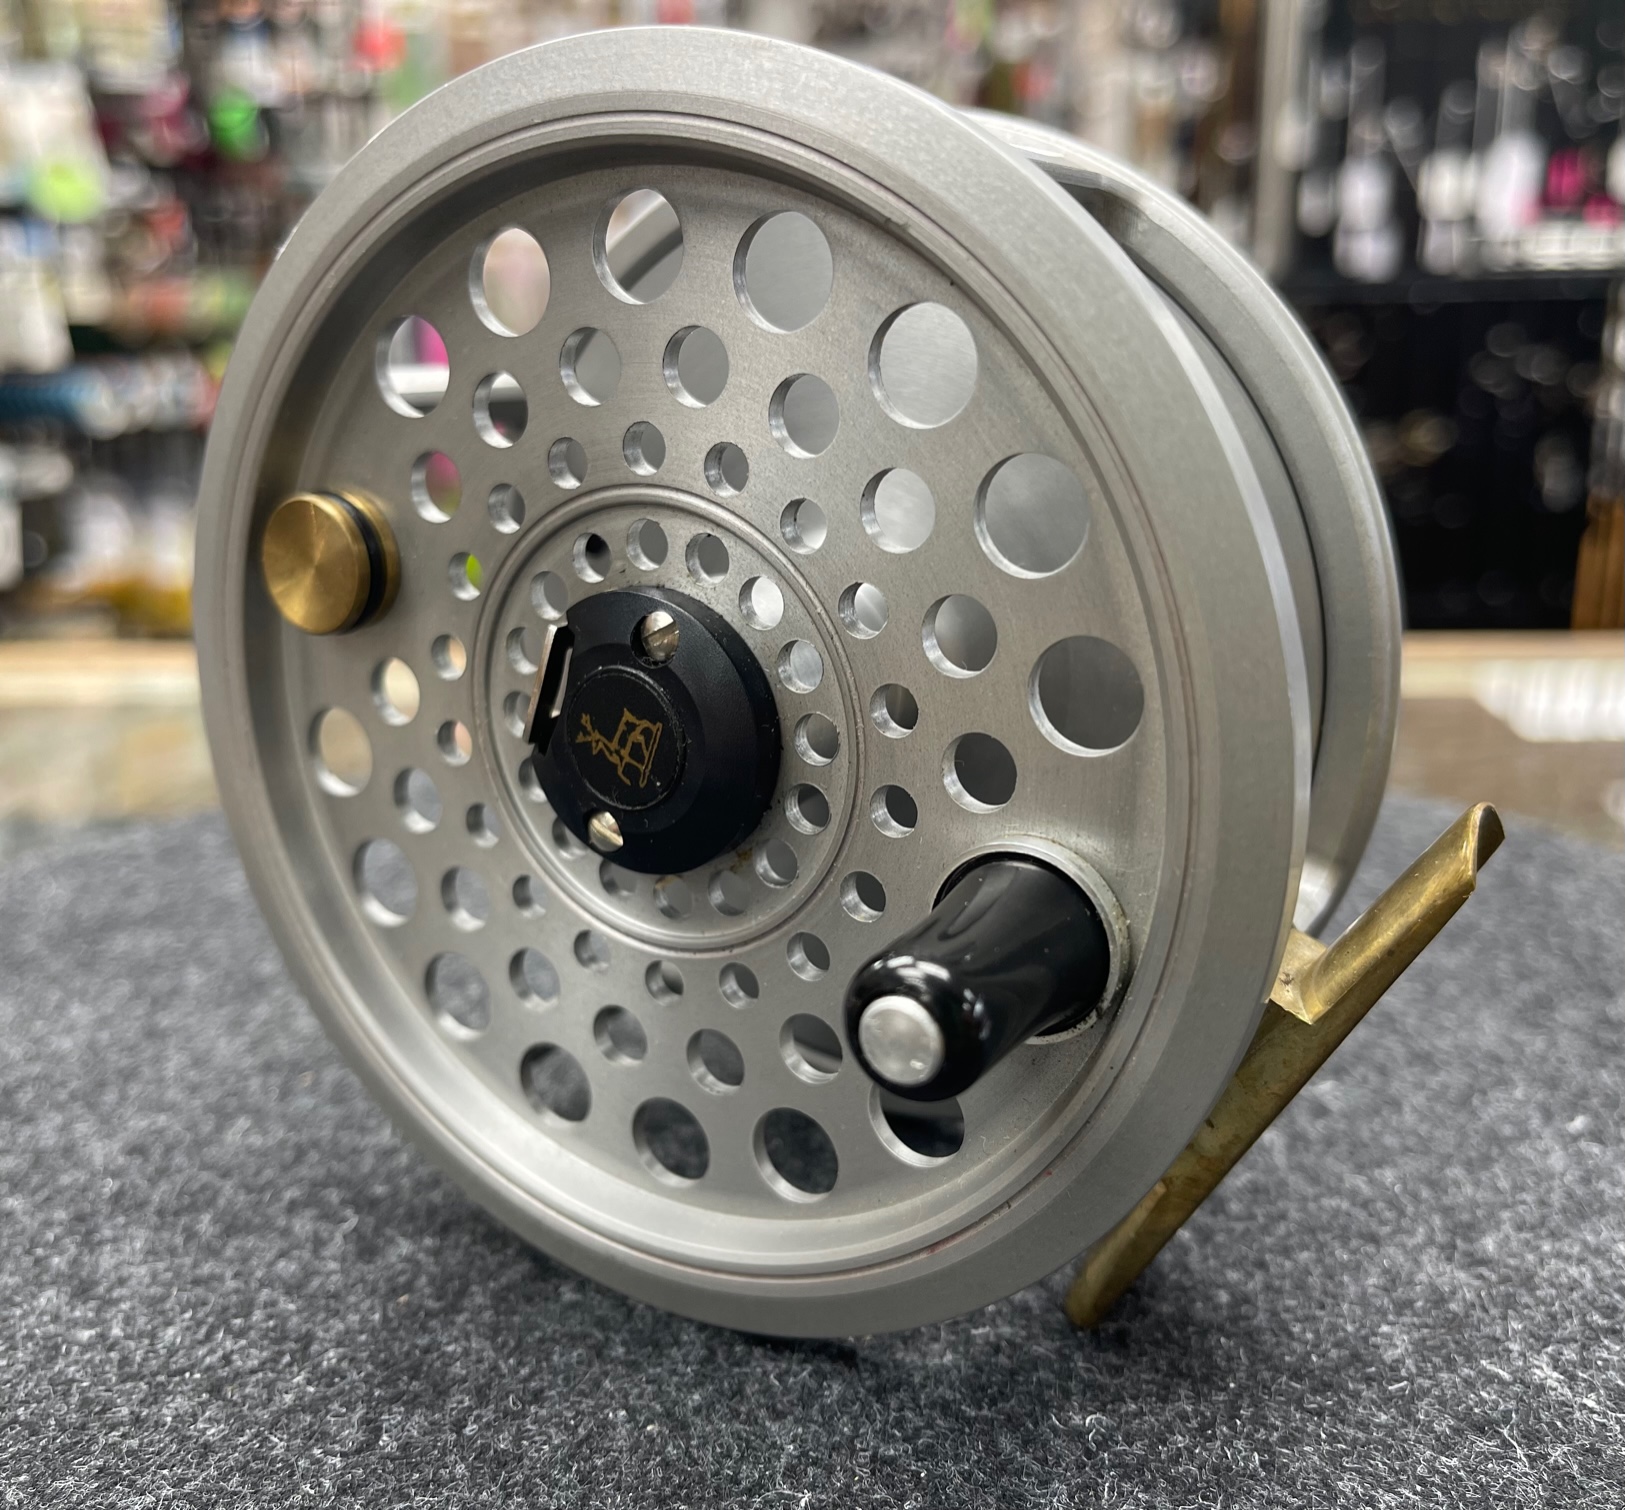 Shakespeare Worcestershire Fly Fly Fishing Reel Product Deta